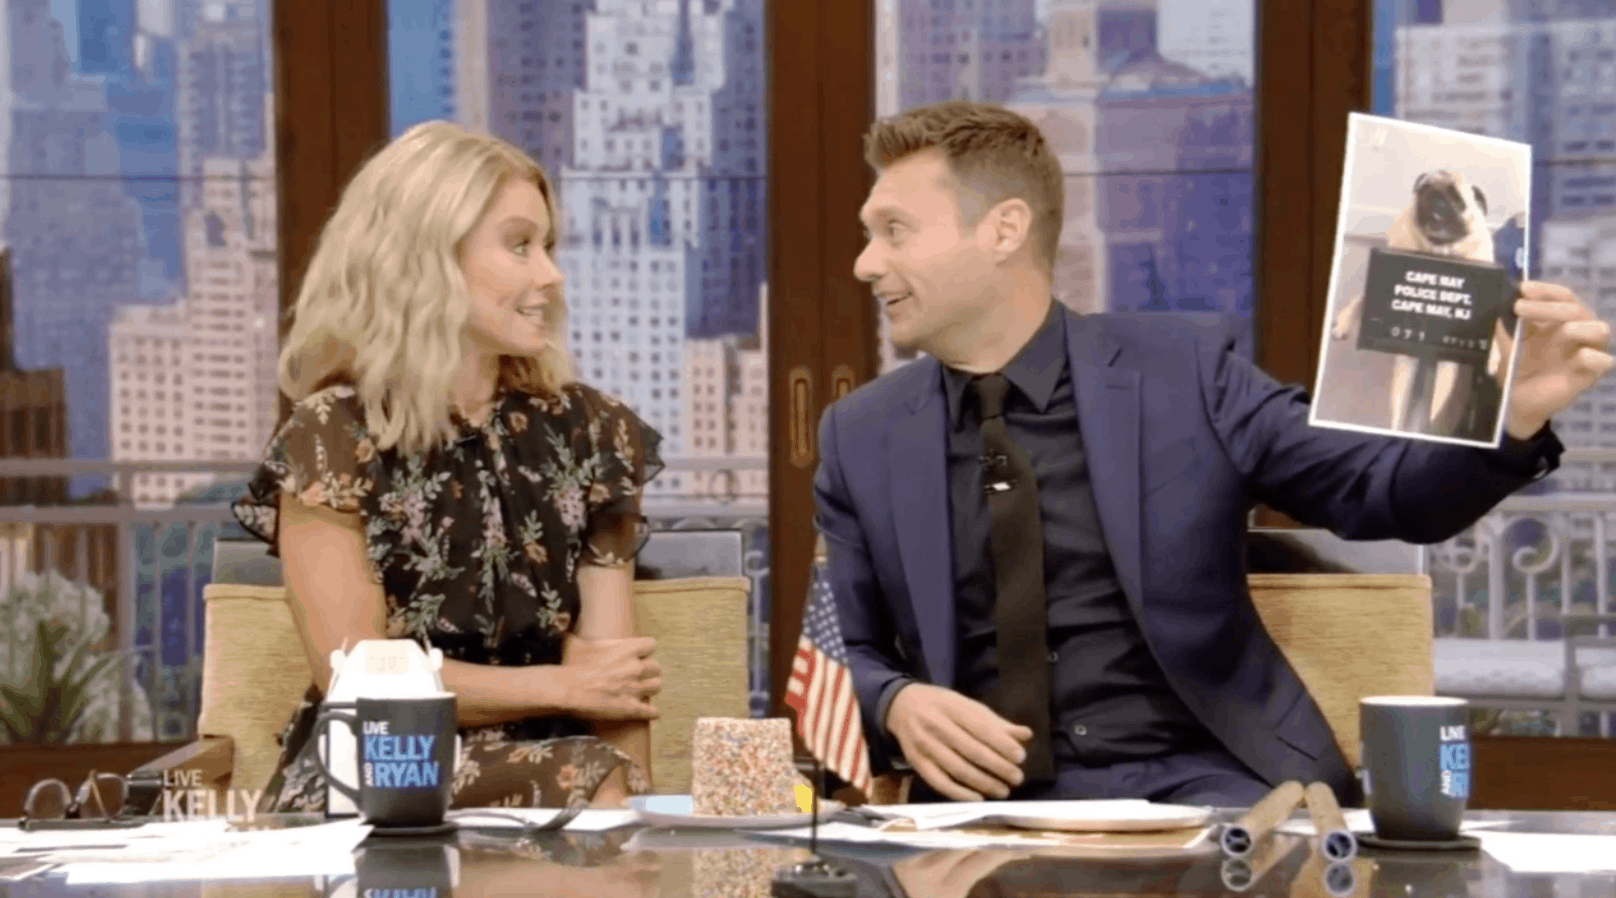 Cape May Makes It On “Live with Kelly and Ryan”